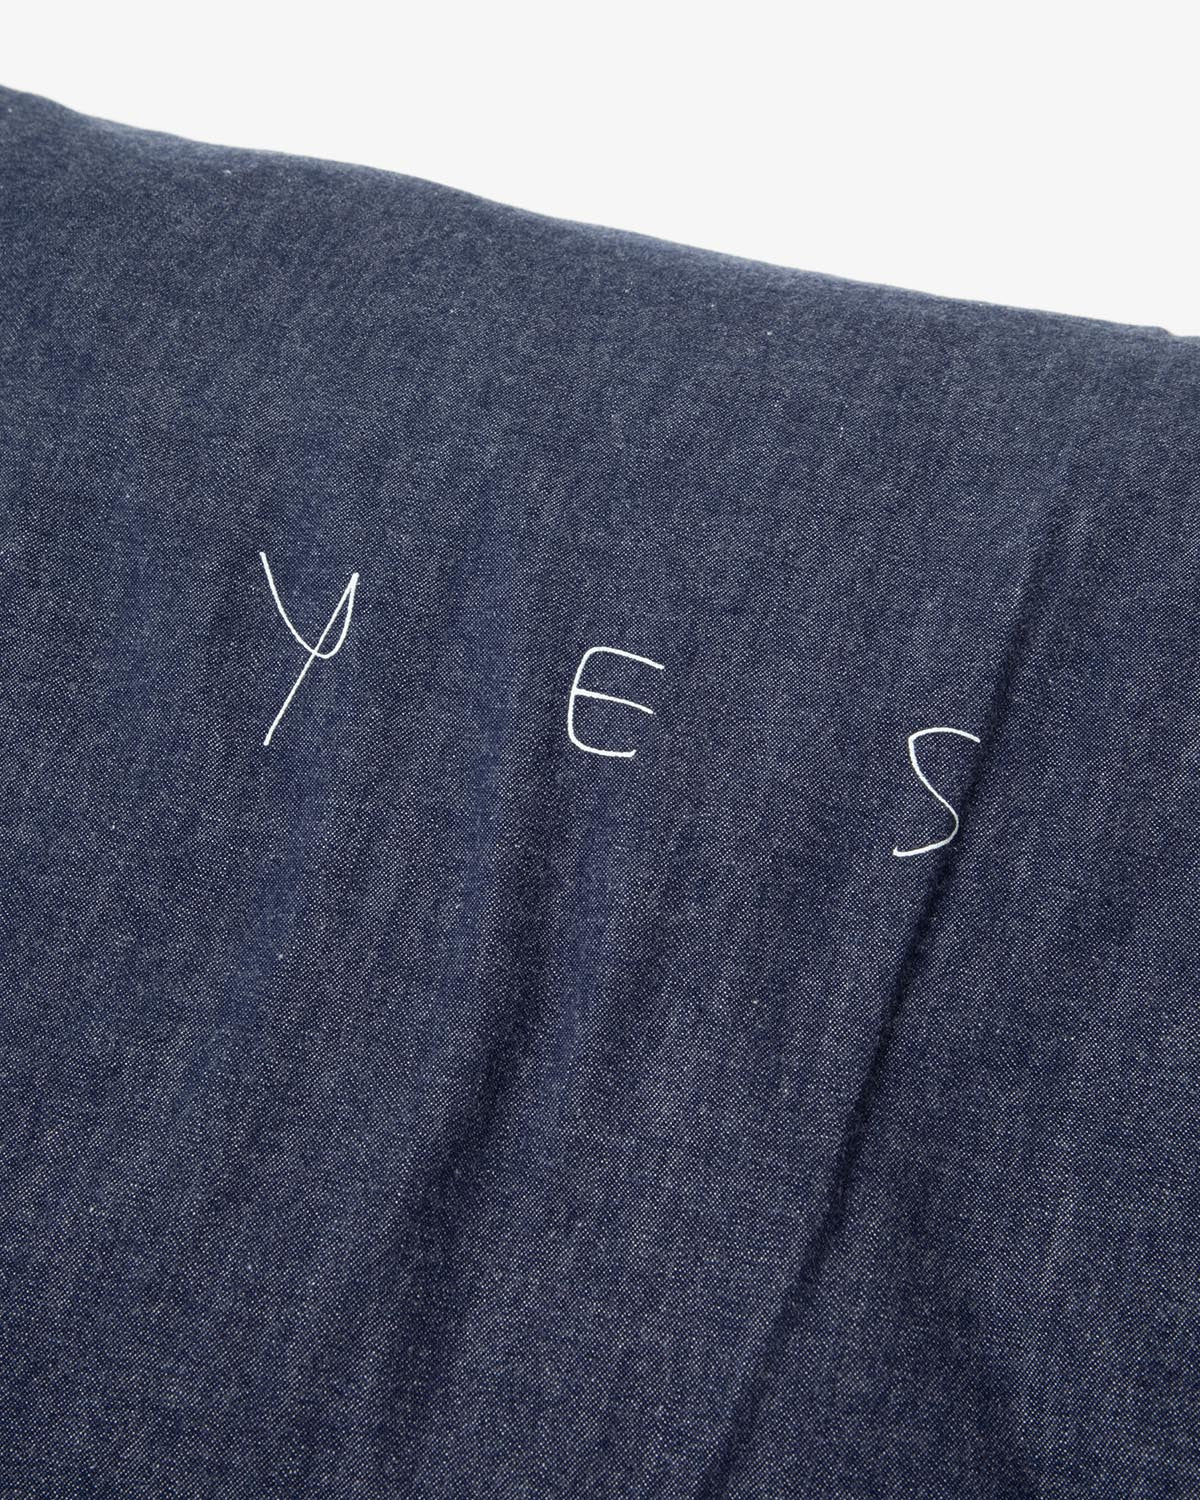 "YES NO" PILLOW